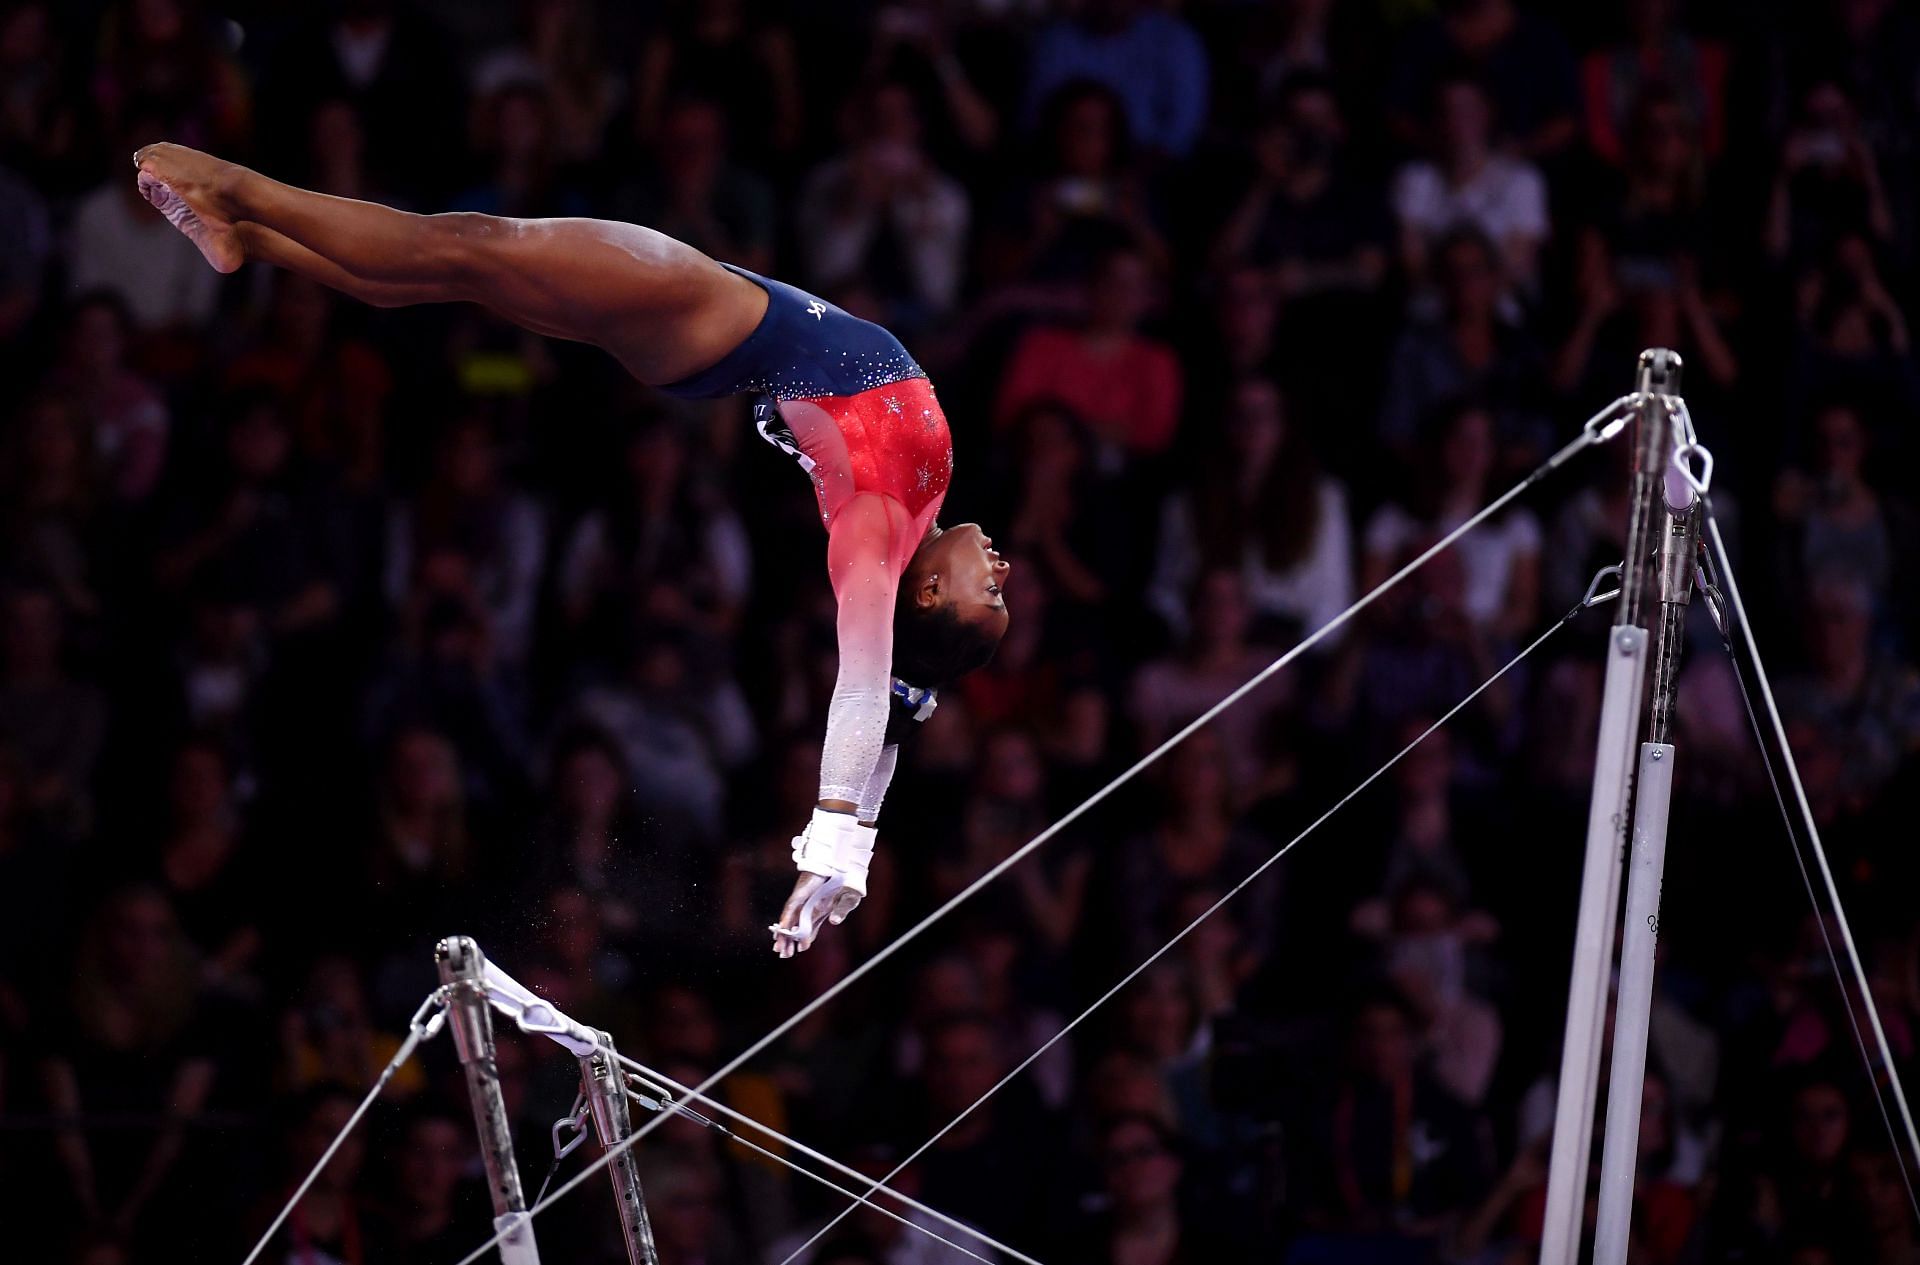 Biles on uneven bars at the 2019 Artistic Gymnastics World Championships